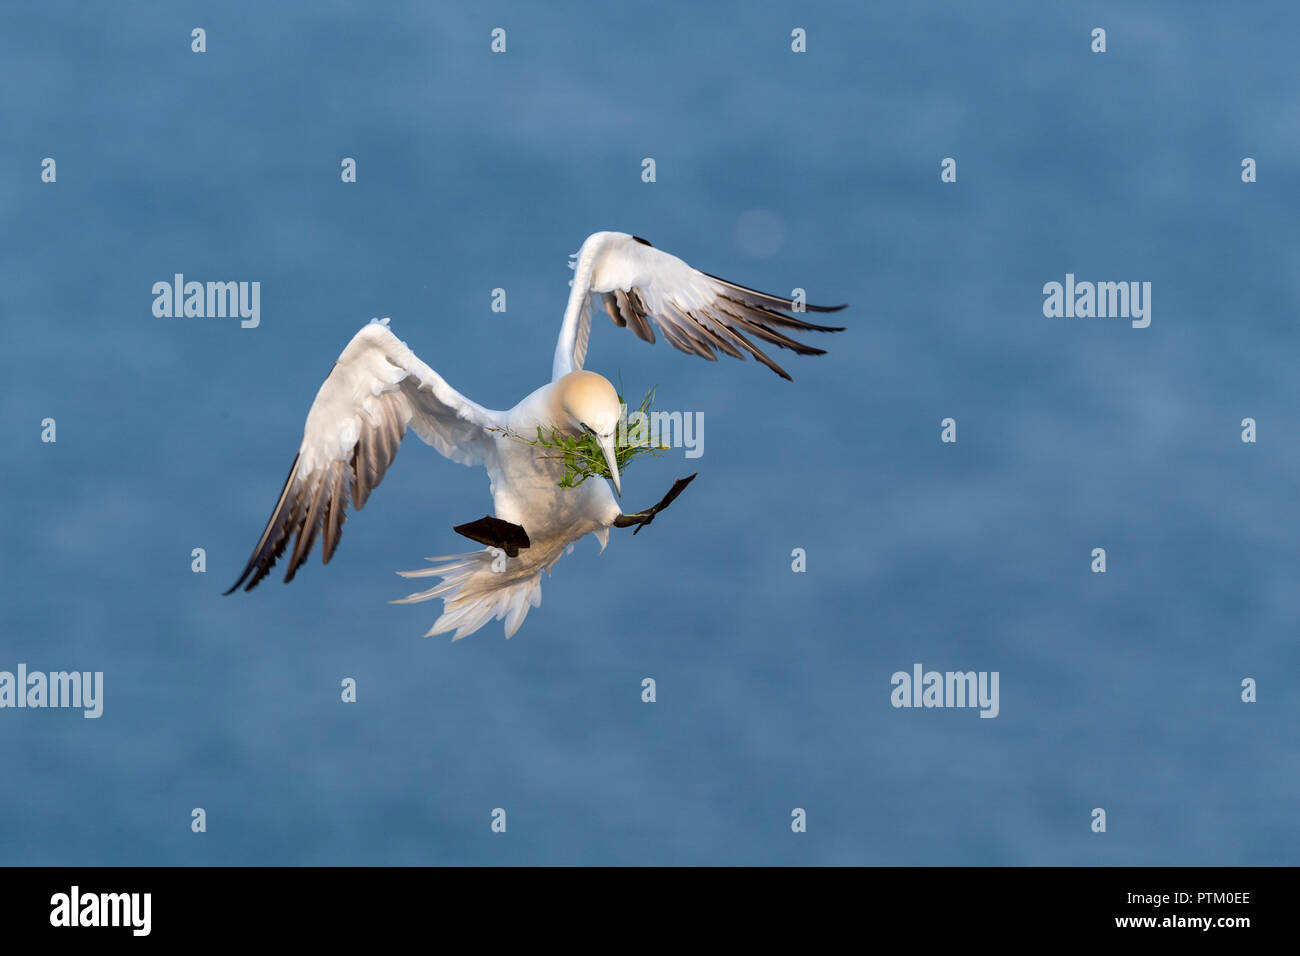 Northern Gannet (Morus bassanus) with nesting material, approaching, Heligoland, Schleswig-Holstein, Germany Stock Photo